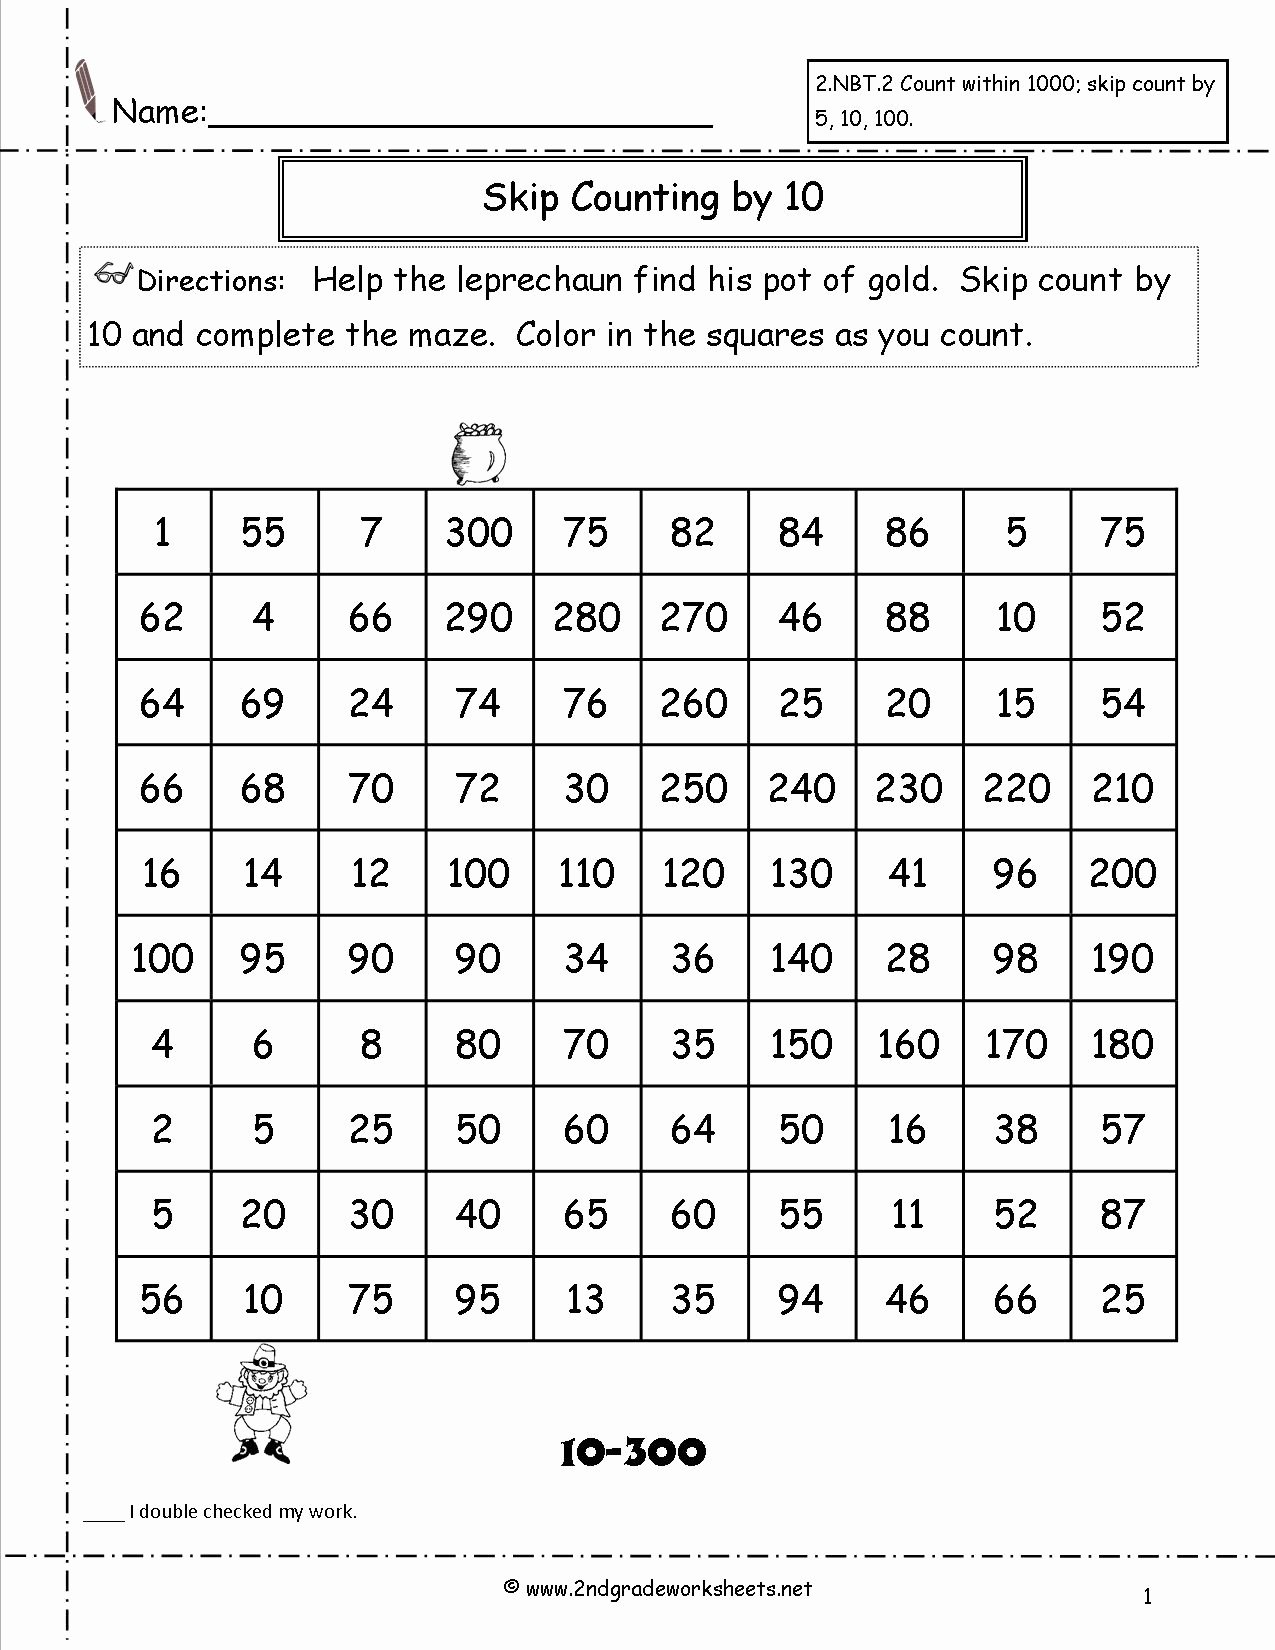 Counting In 10s Worksheet Beautiful Free Skip Counting Worksheets